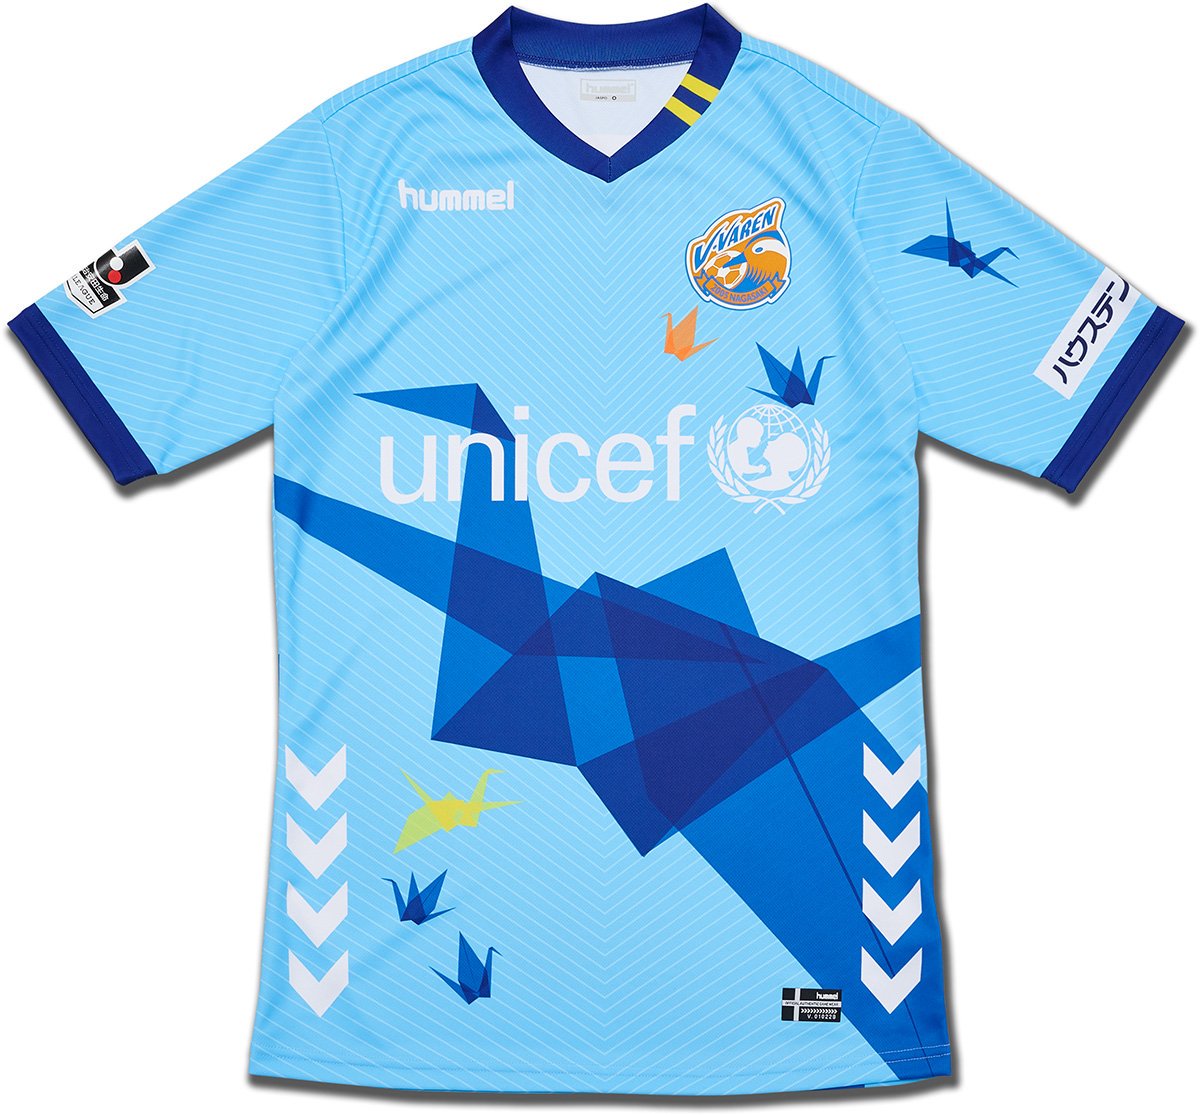 Langt væk lustre Historiker hummel on Twitter: "The limitied edition 2018/19 Nagasaki Peace Jersey is  designed in collaboration with Japanese football club @v_varenstaff  commemorating the tragic Nagasaki atomic bombings - bringing a strong  message of peace.